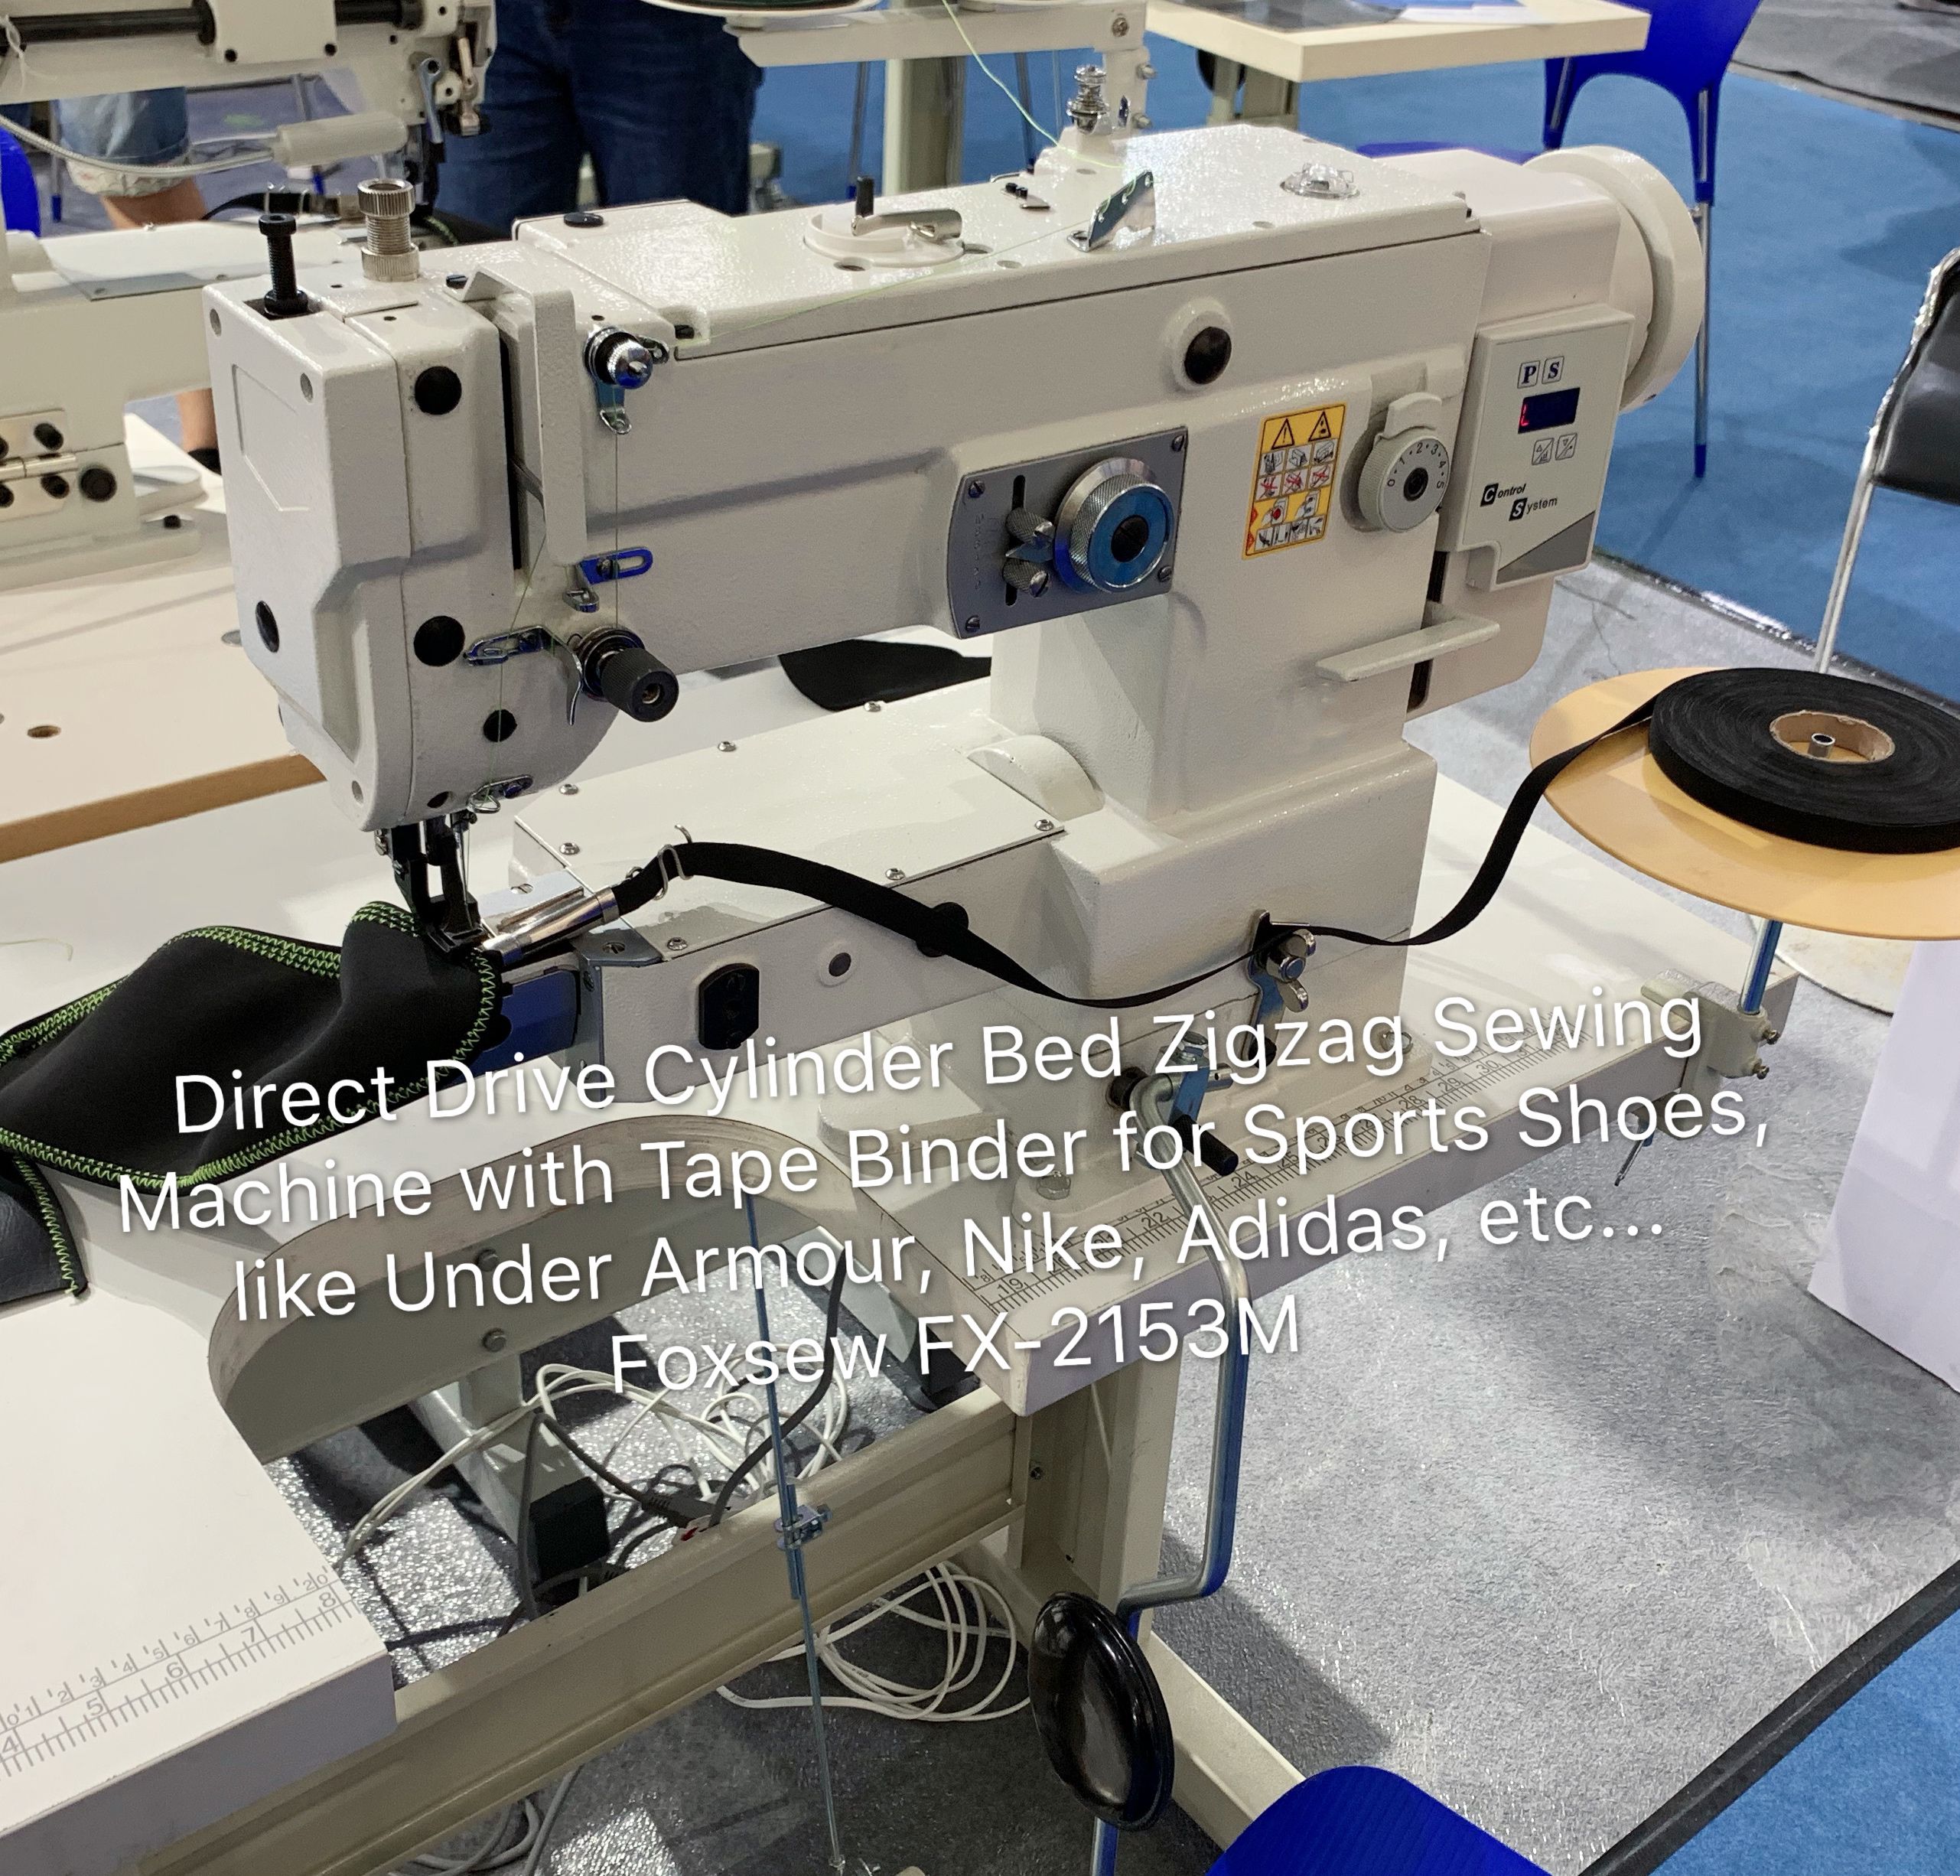 Direct Drive Cylinder Bed Zigzag Sewing Machine for Tape Binding on Sports Shoes Foxsew FX-2153M-01-003